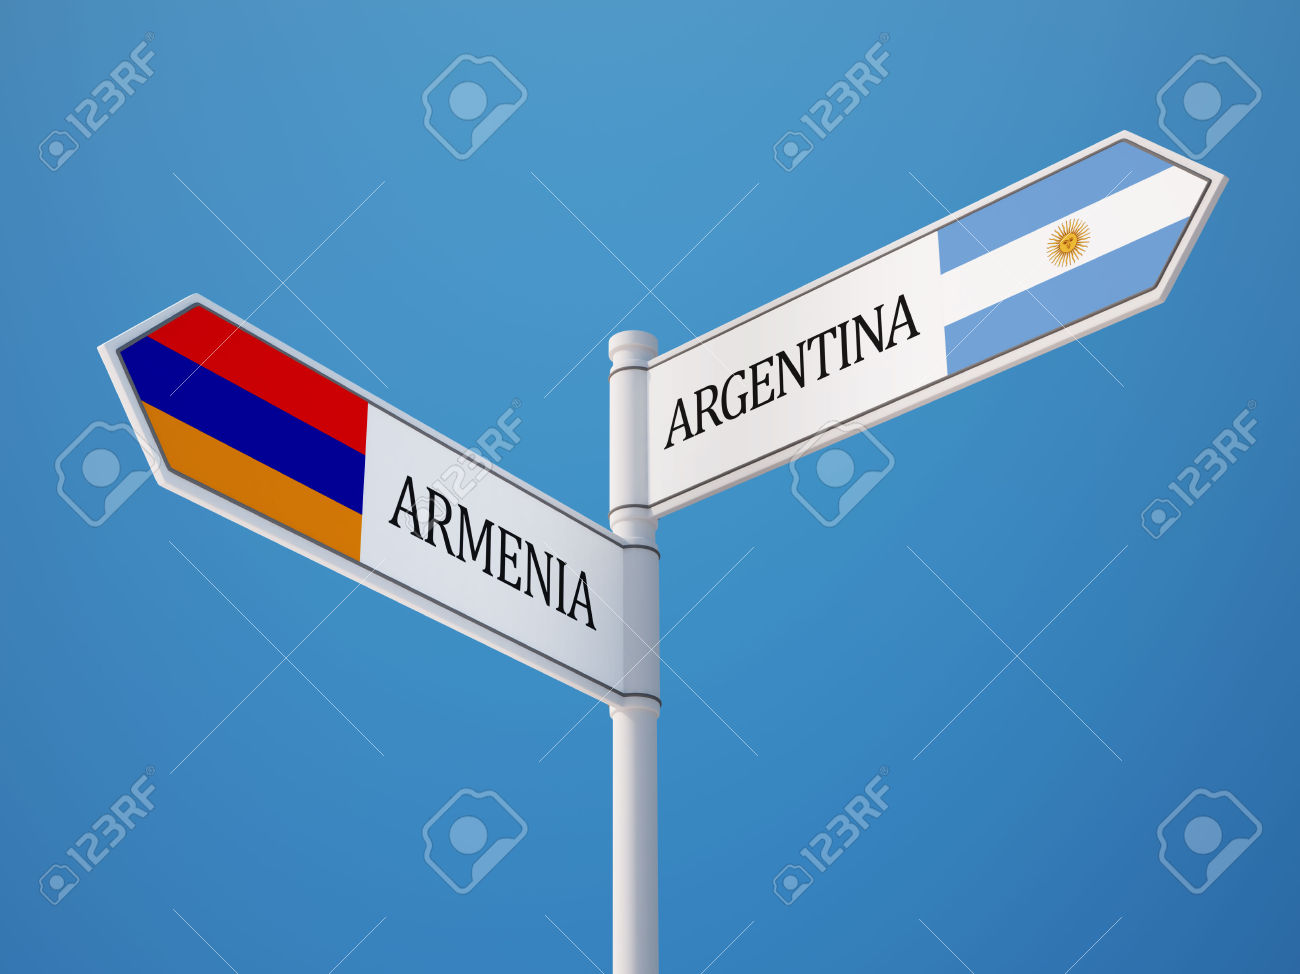 Armenia and Argentina will exchange information on taxation issues